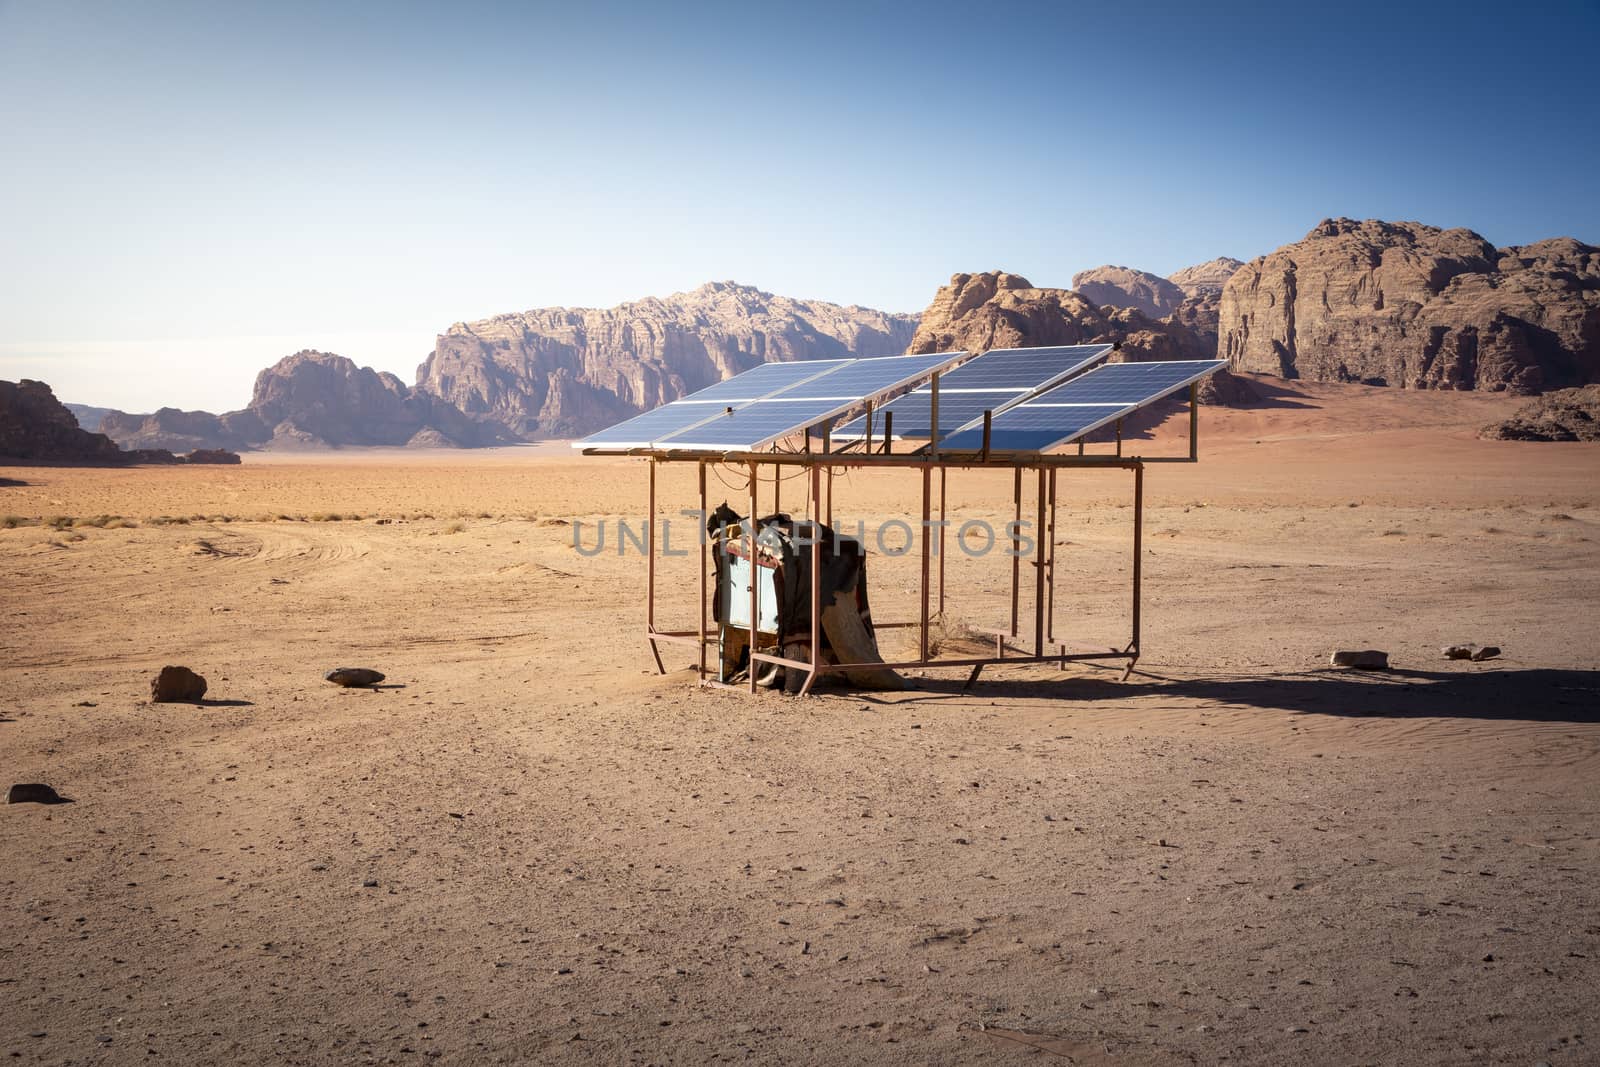 Off-grid and small scale solar installation in the desert by kb79